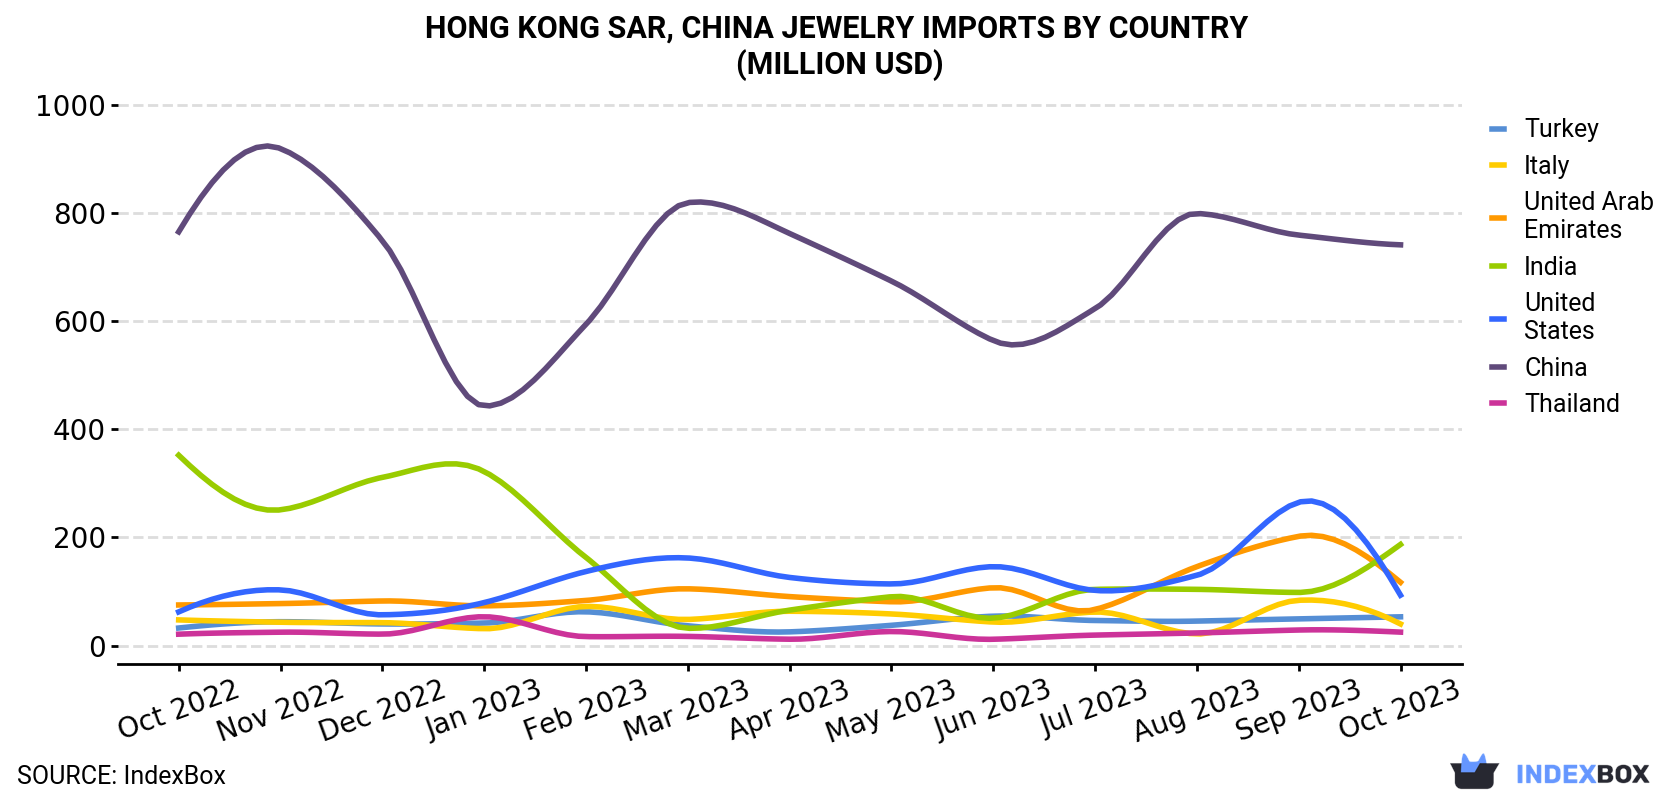 Hong Kong Jewelry Imports By Country (Million USD)